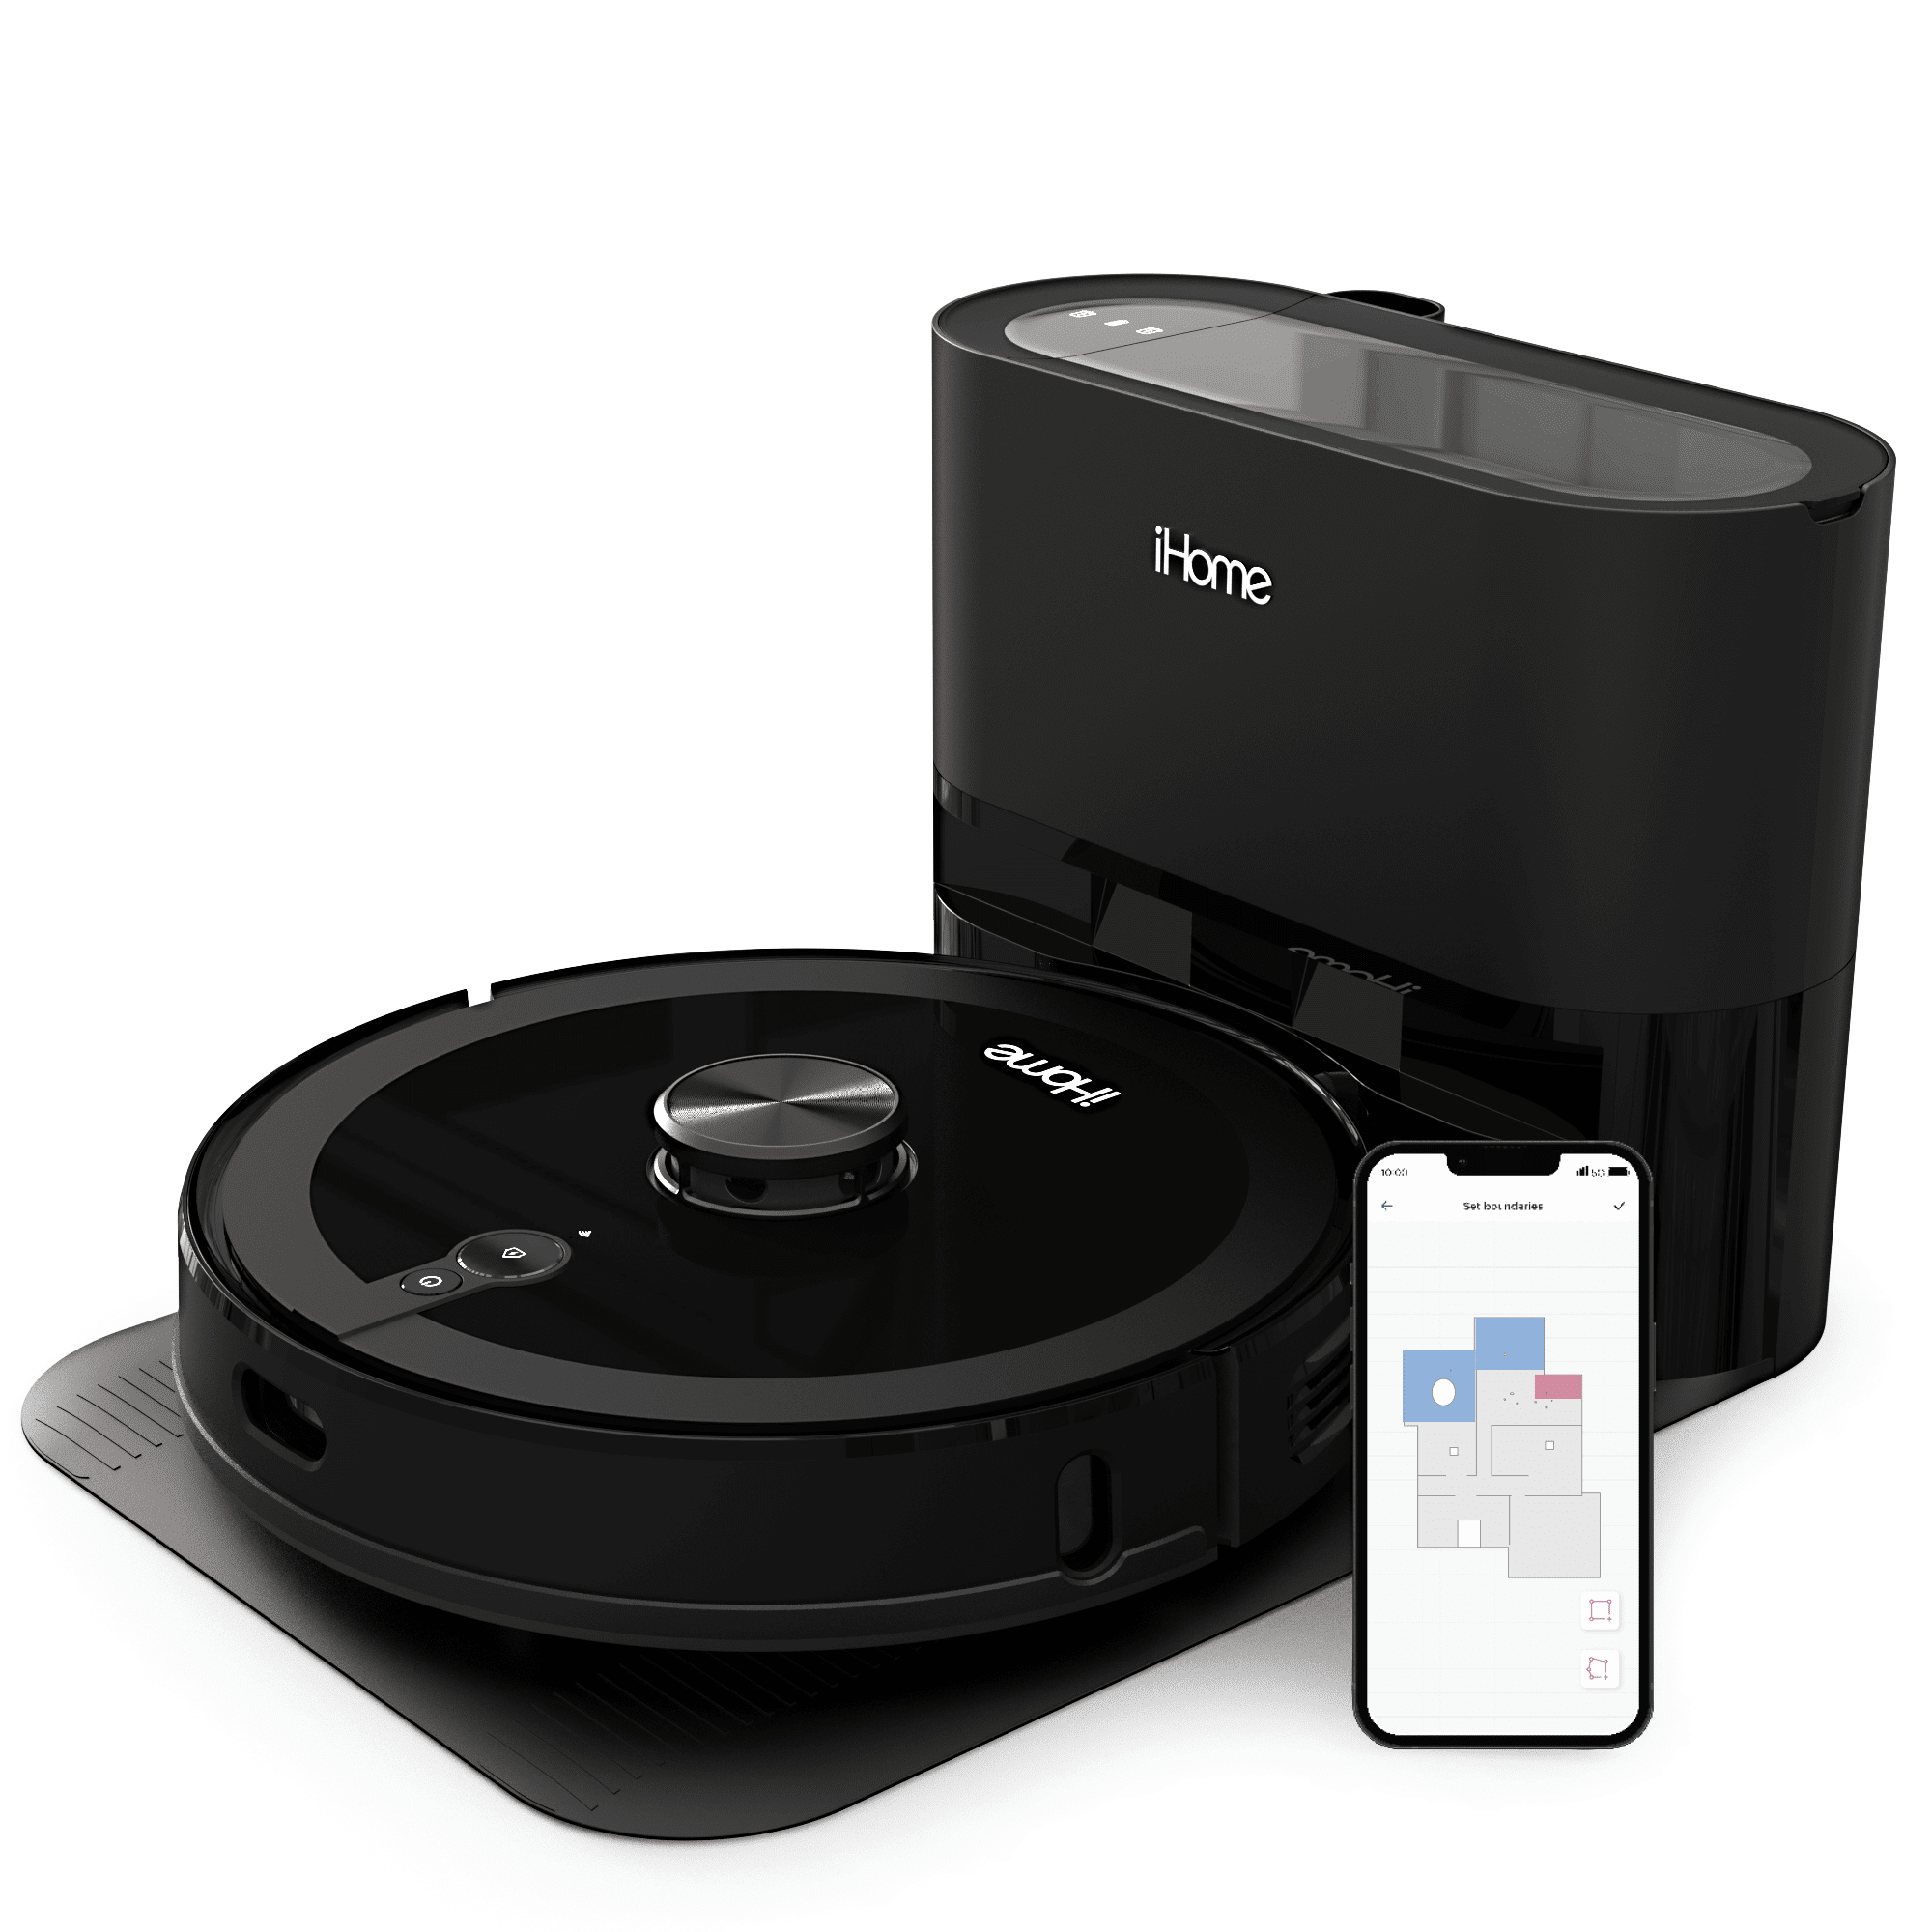 iHome AutoVac Nova Pro 2700pa Strong Suction 3-in-1 Robot Vacuum and Vibrating Mop with LIDAR Navigation and Auto Empty Base